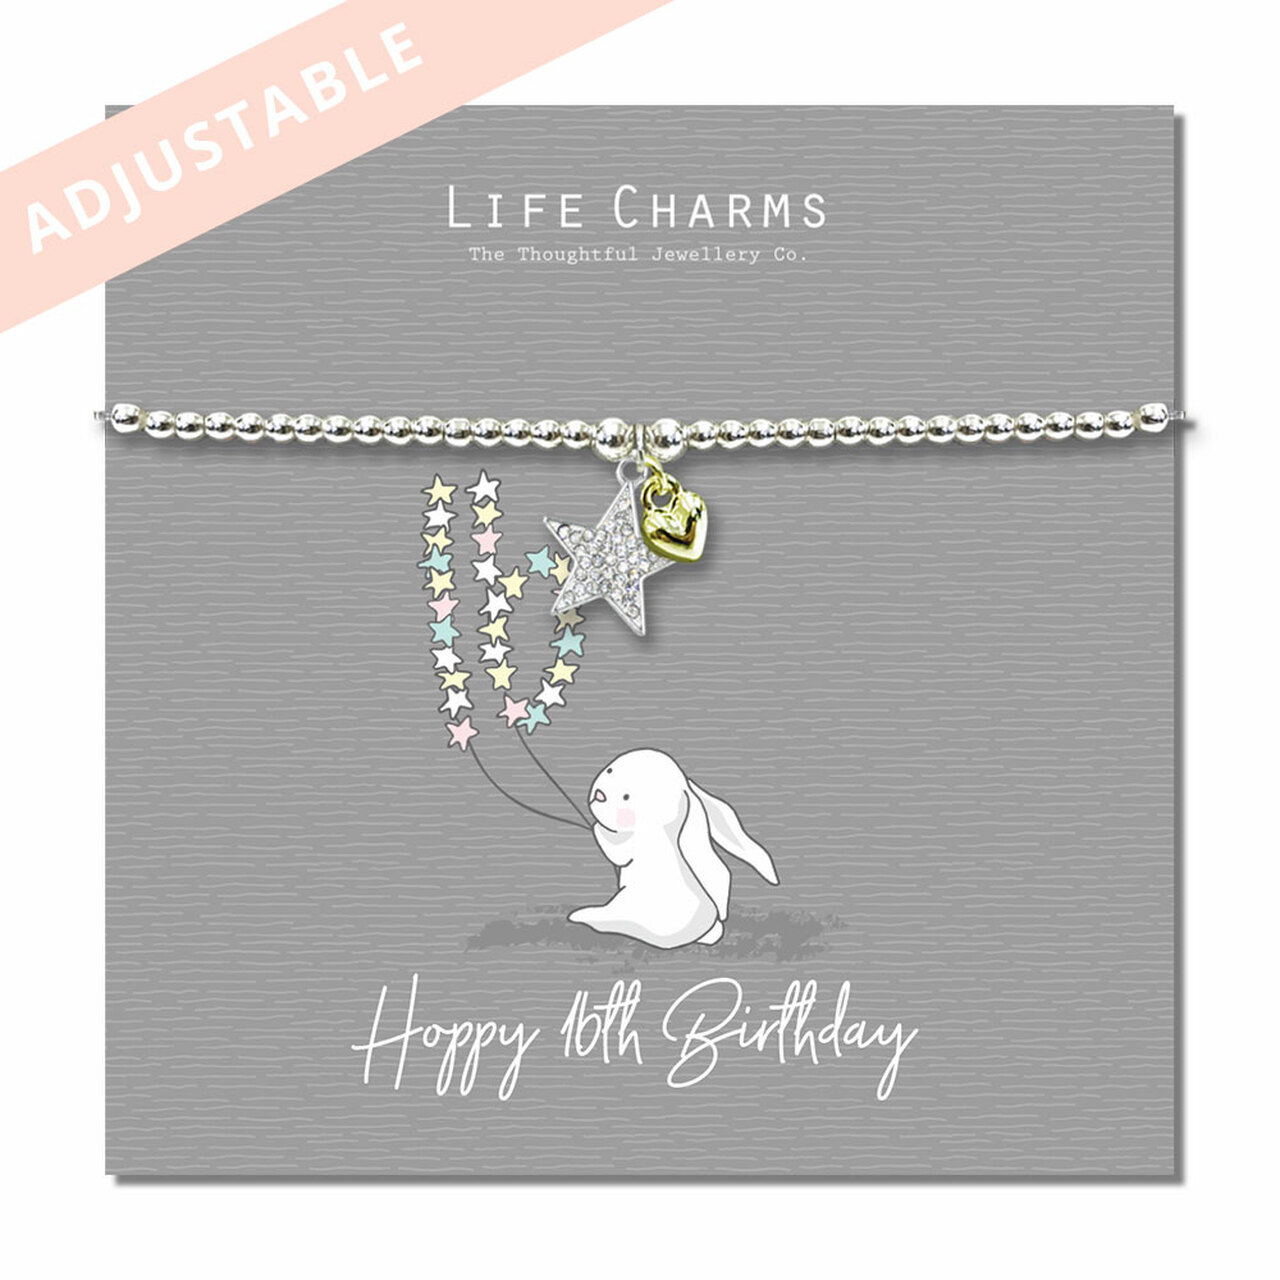 Life Charms Happy 16th Birthday Silver Bracelet - Rosey Rabbits This very cute Rosey rabbits encrusted star and mini gold puffed heart charm bracelet is the perfect gift for that special birthday girl.